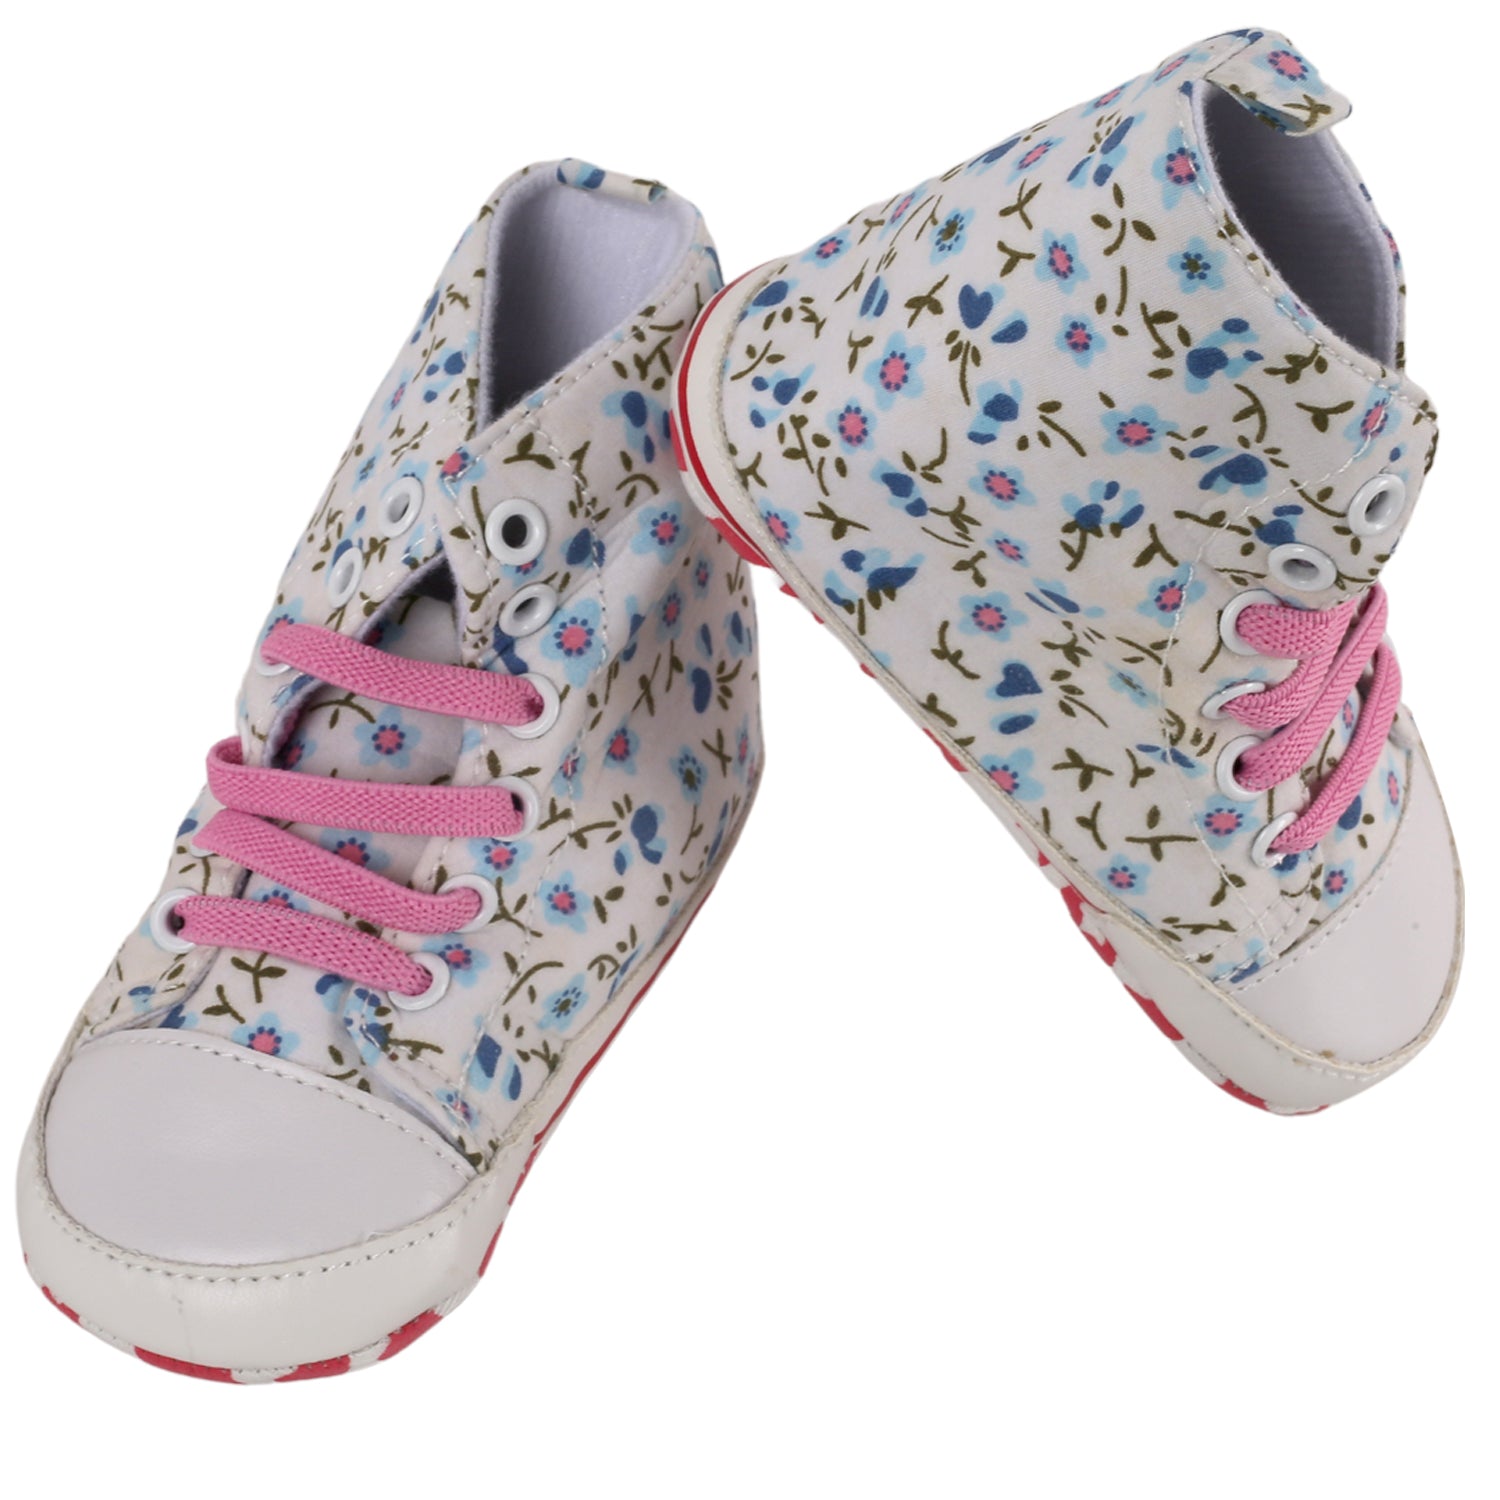 Baby Moo Floral White And Pink High Top Booties - Baby Moo